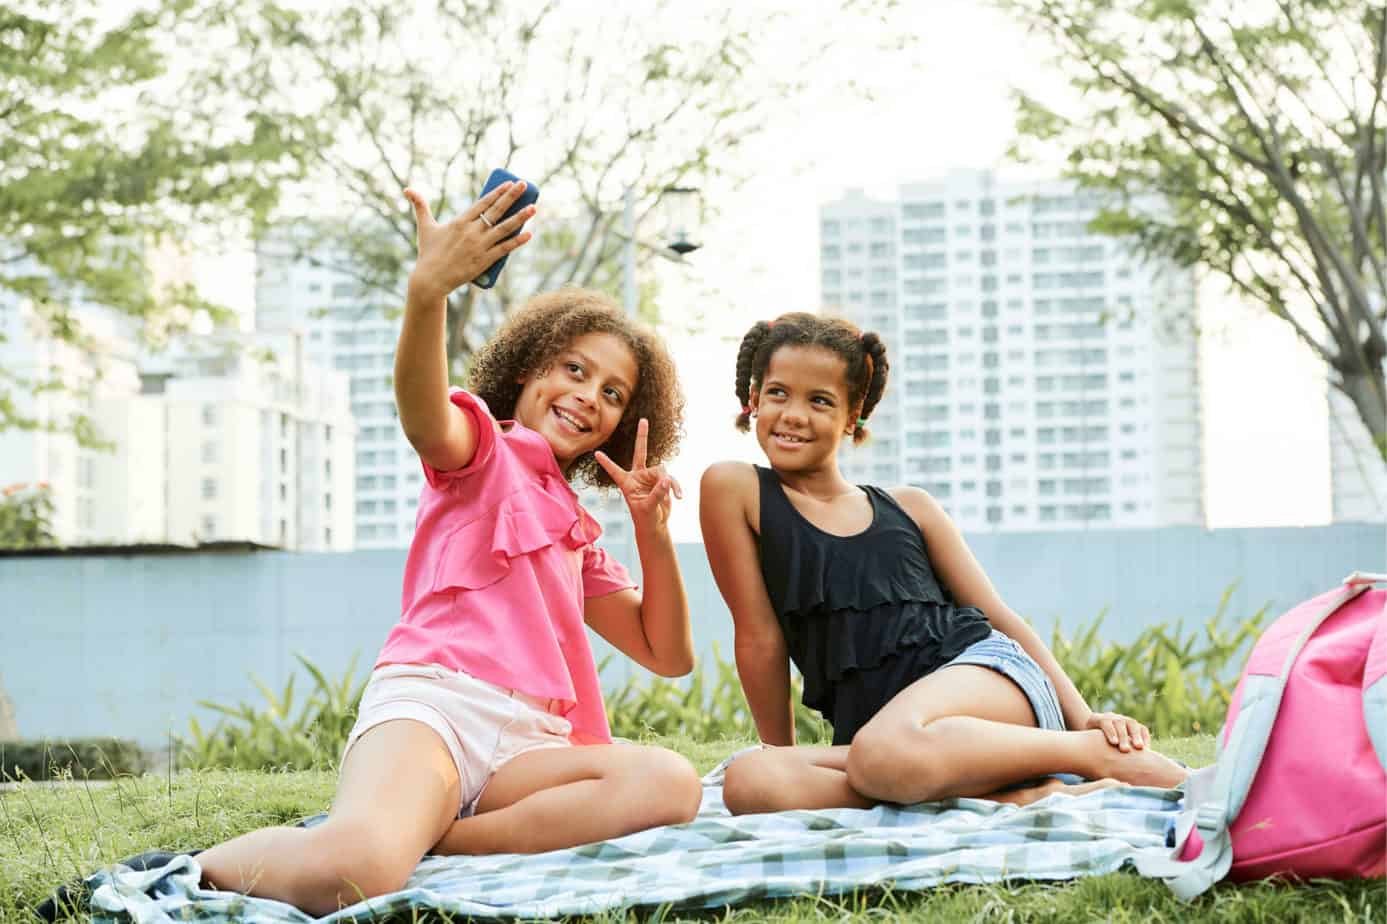 snapchat parental control - two young teen girls taking a selfie sitting on the grass in a park in a city